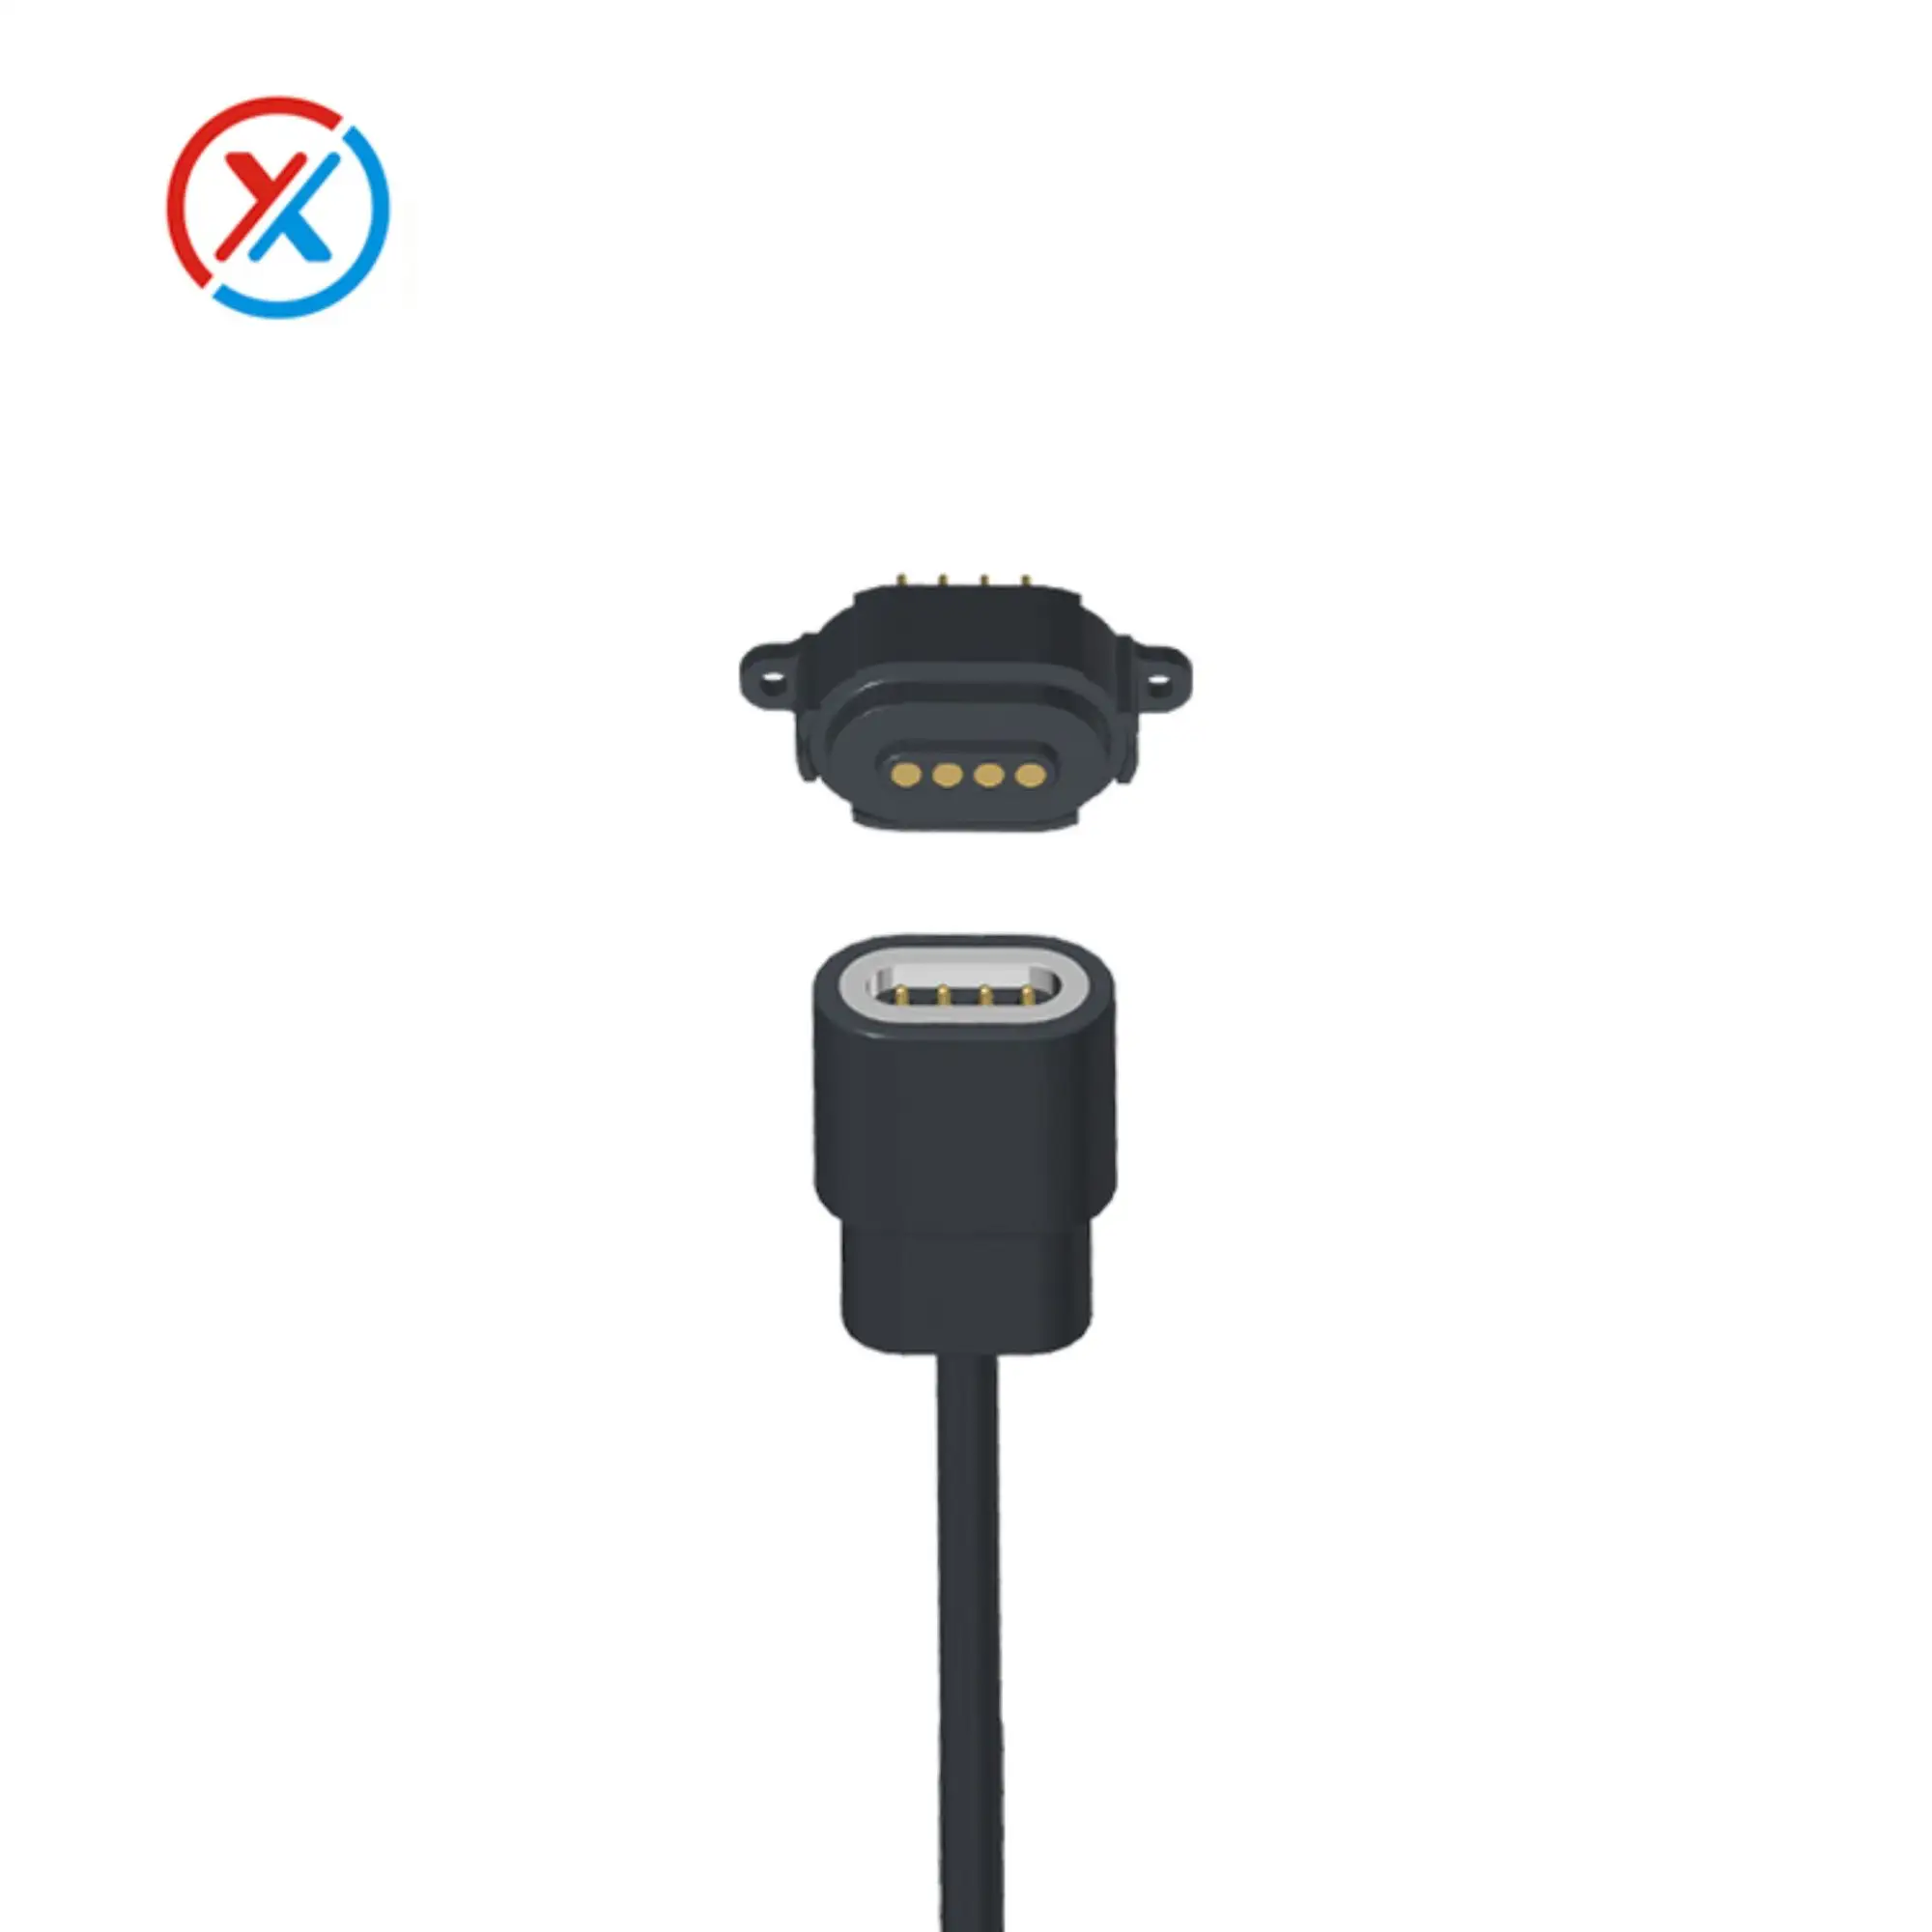 The 4-pin Magnetic Data Cable with Pogo Pin Connector